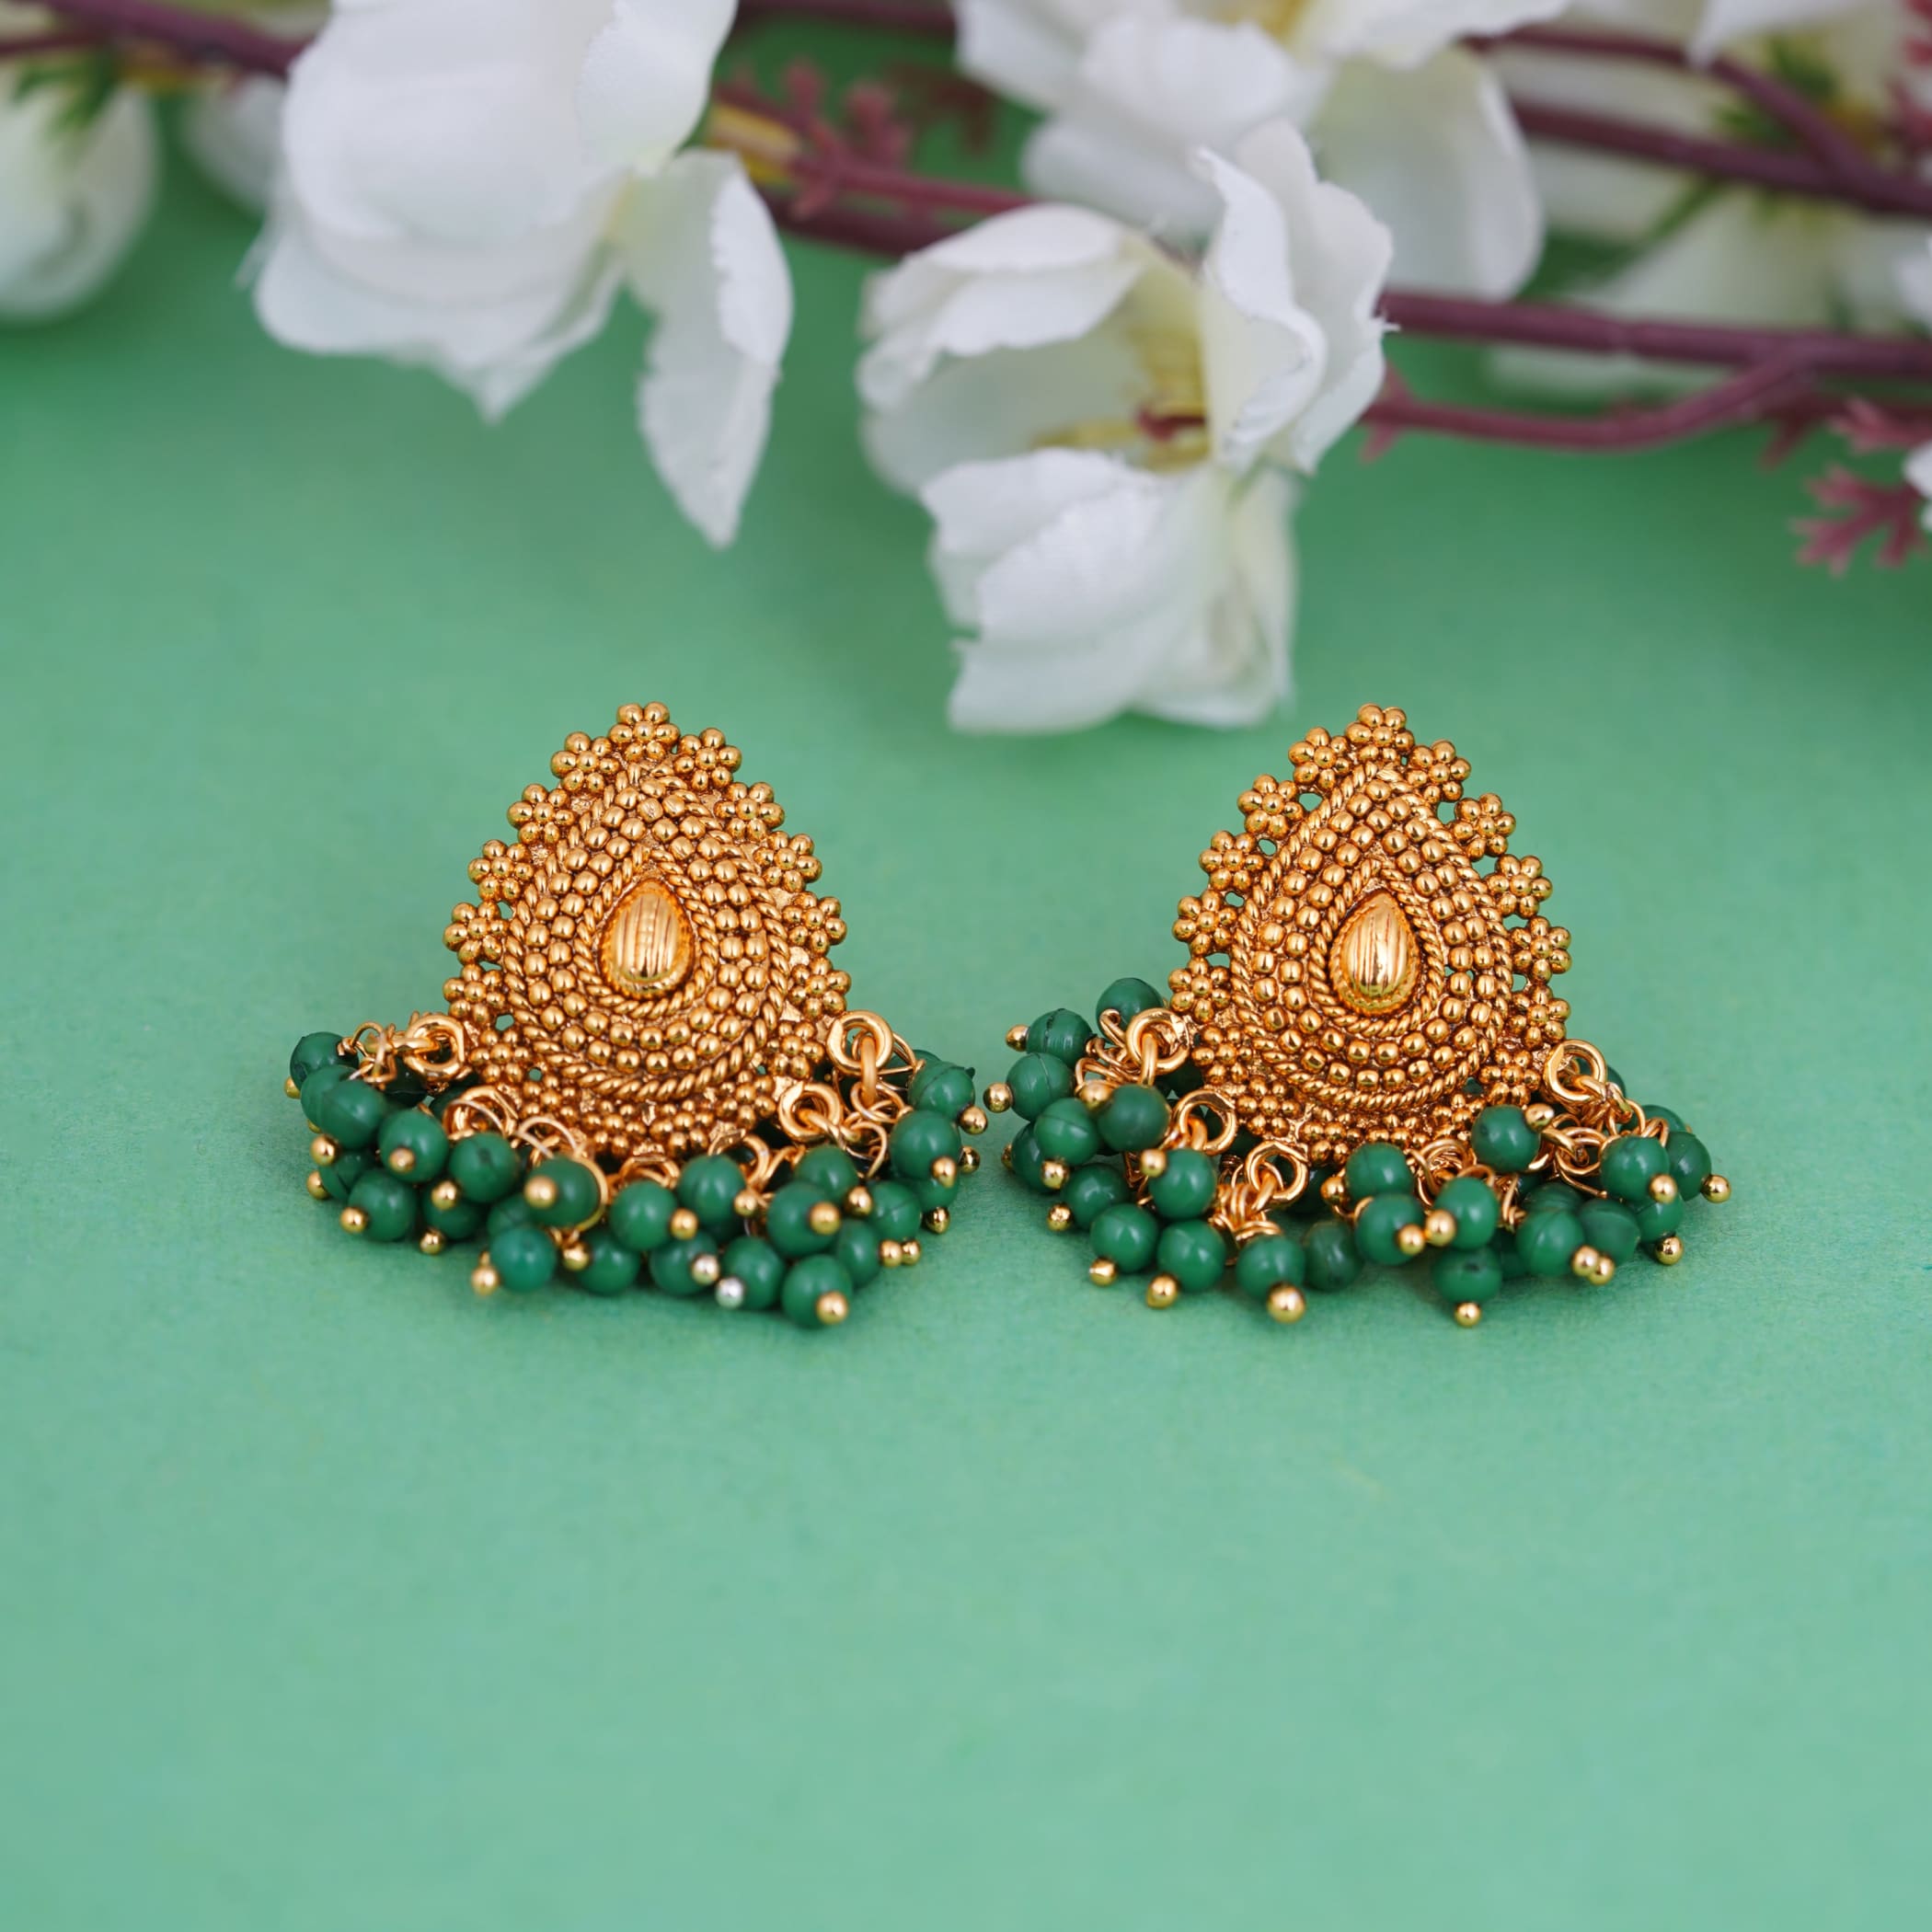 Gold Earrings Collections South Indian Earrings Designs Gold Earrings  Design, Jewelry, Accessories, Accessory, Treasure Transparent Png –  Pngset.com